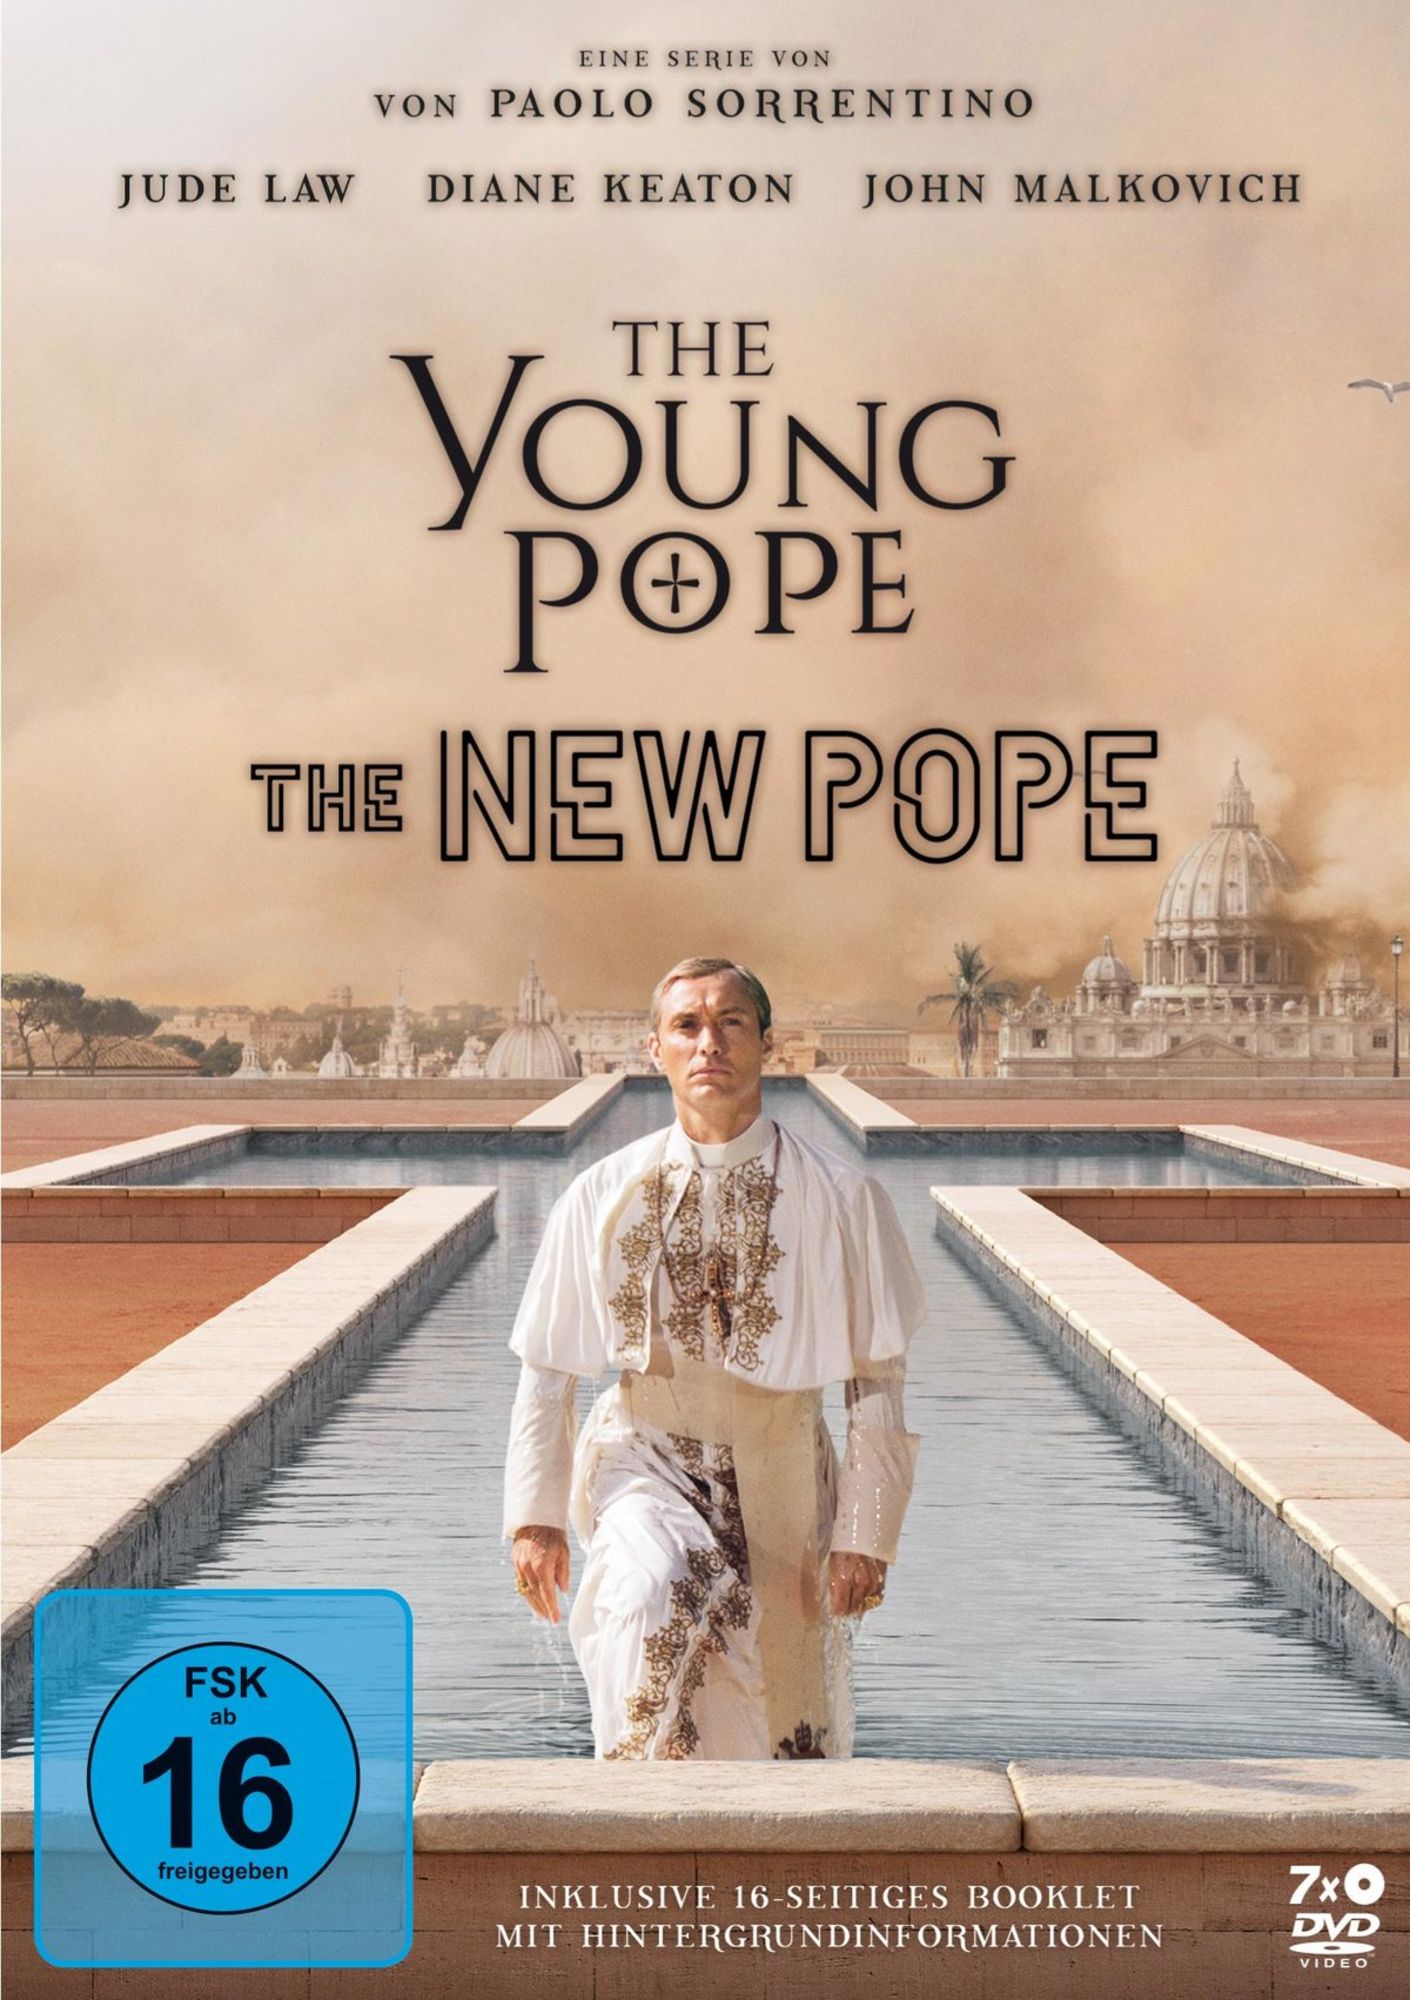 ≥ The Young Pope - Jude Law, Paolo Sorrentino — Dvd's